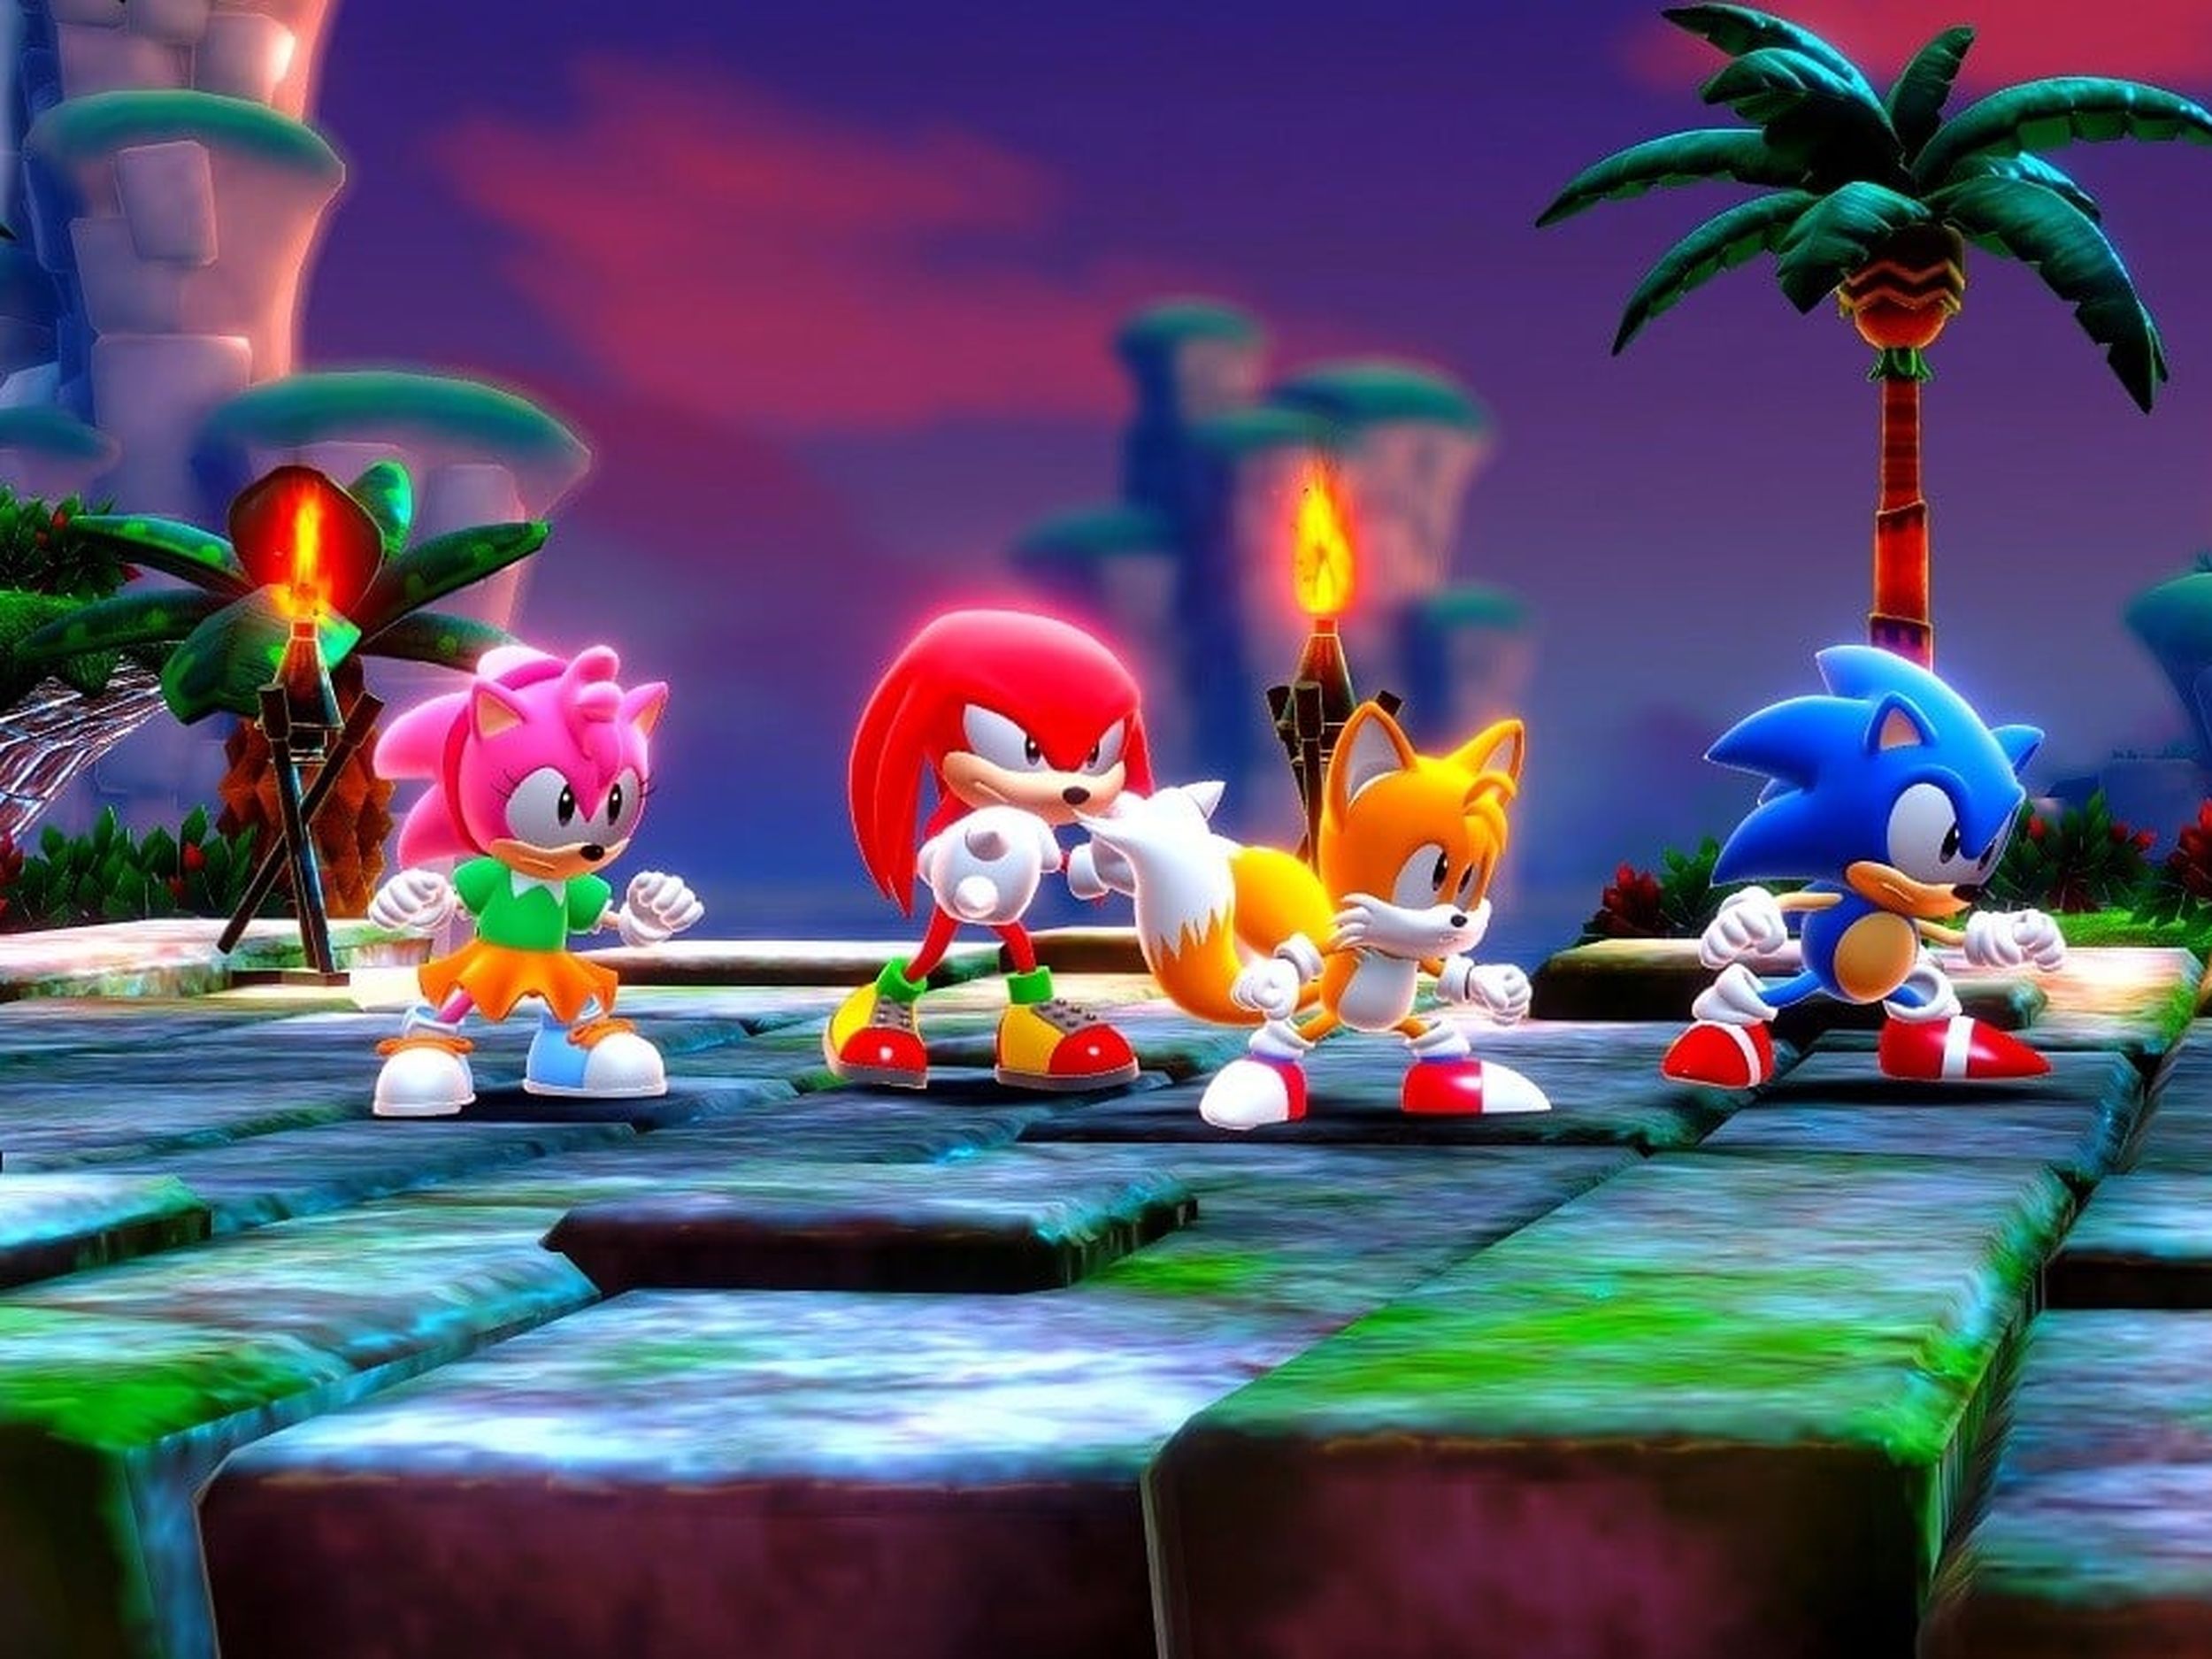 Sonic Superstars': Pricing, Availability & Where to Buy Online